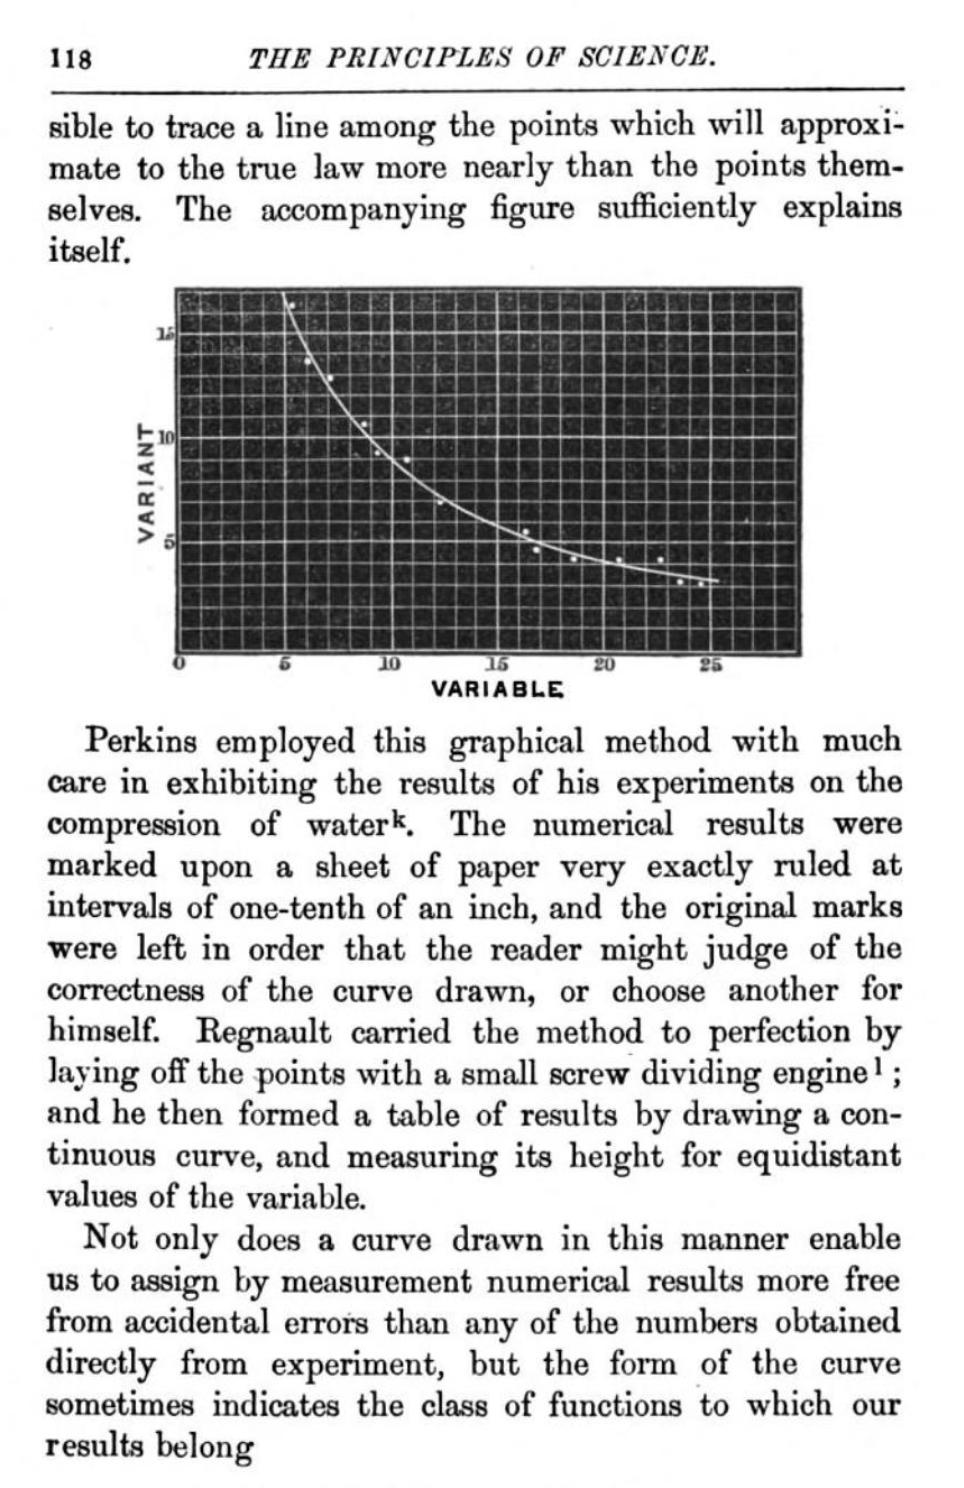 A page from a book where, inserted between text in the top half of the page, a simple line graph is displayed. The downward sloping line is plotted onto a grid that consists of 1-unit measurements. The vertical Y axis value is labeled “variant,” and the horizontal X axis value is labeled as “variable.” The downward slope indicates that as the variable increases in amount, the variant decreases.